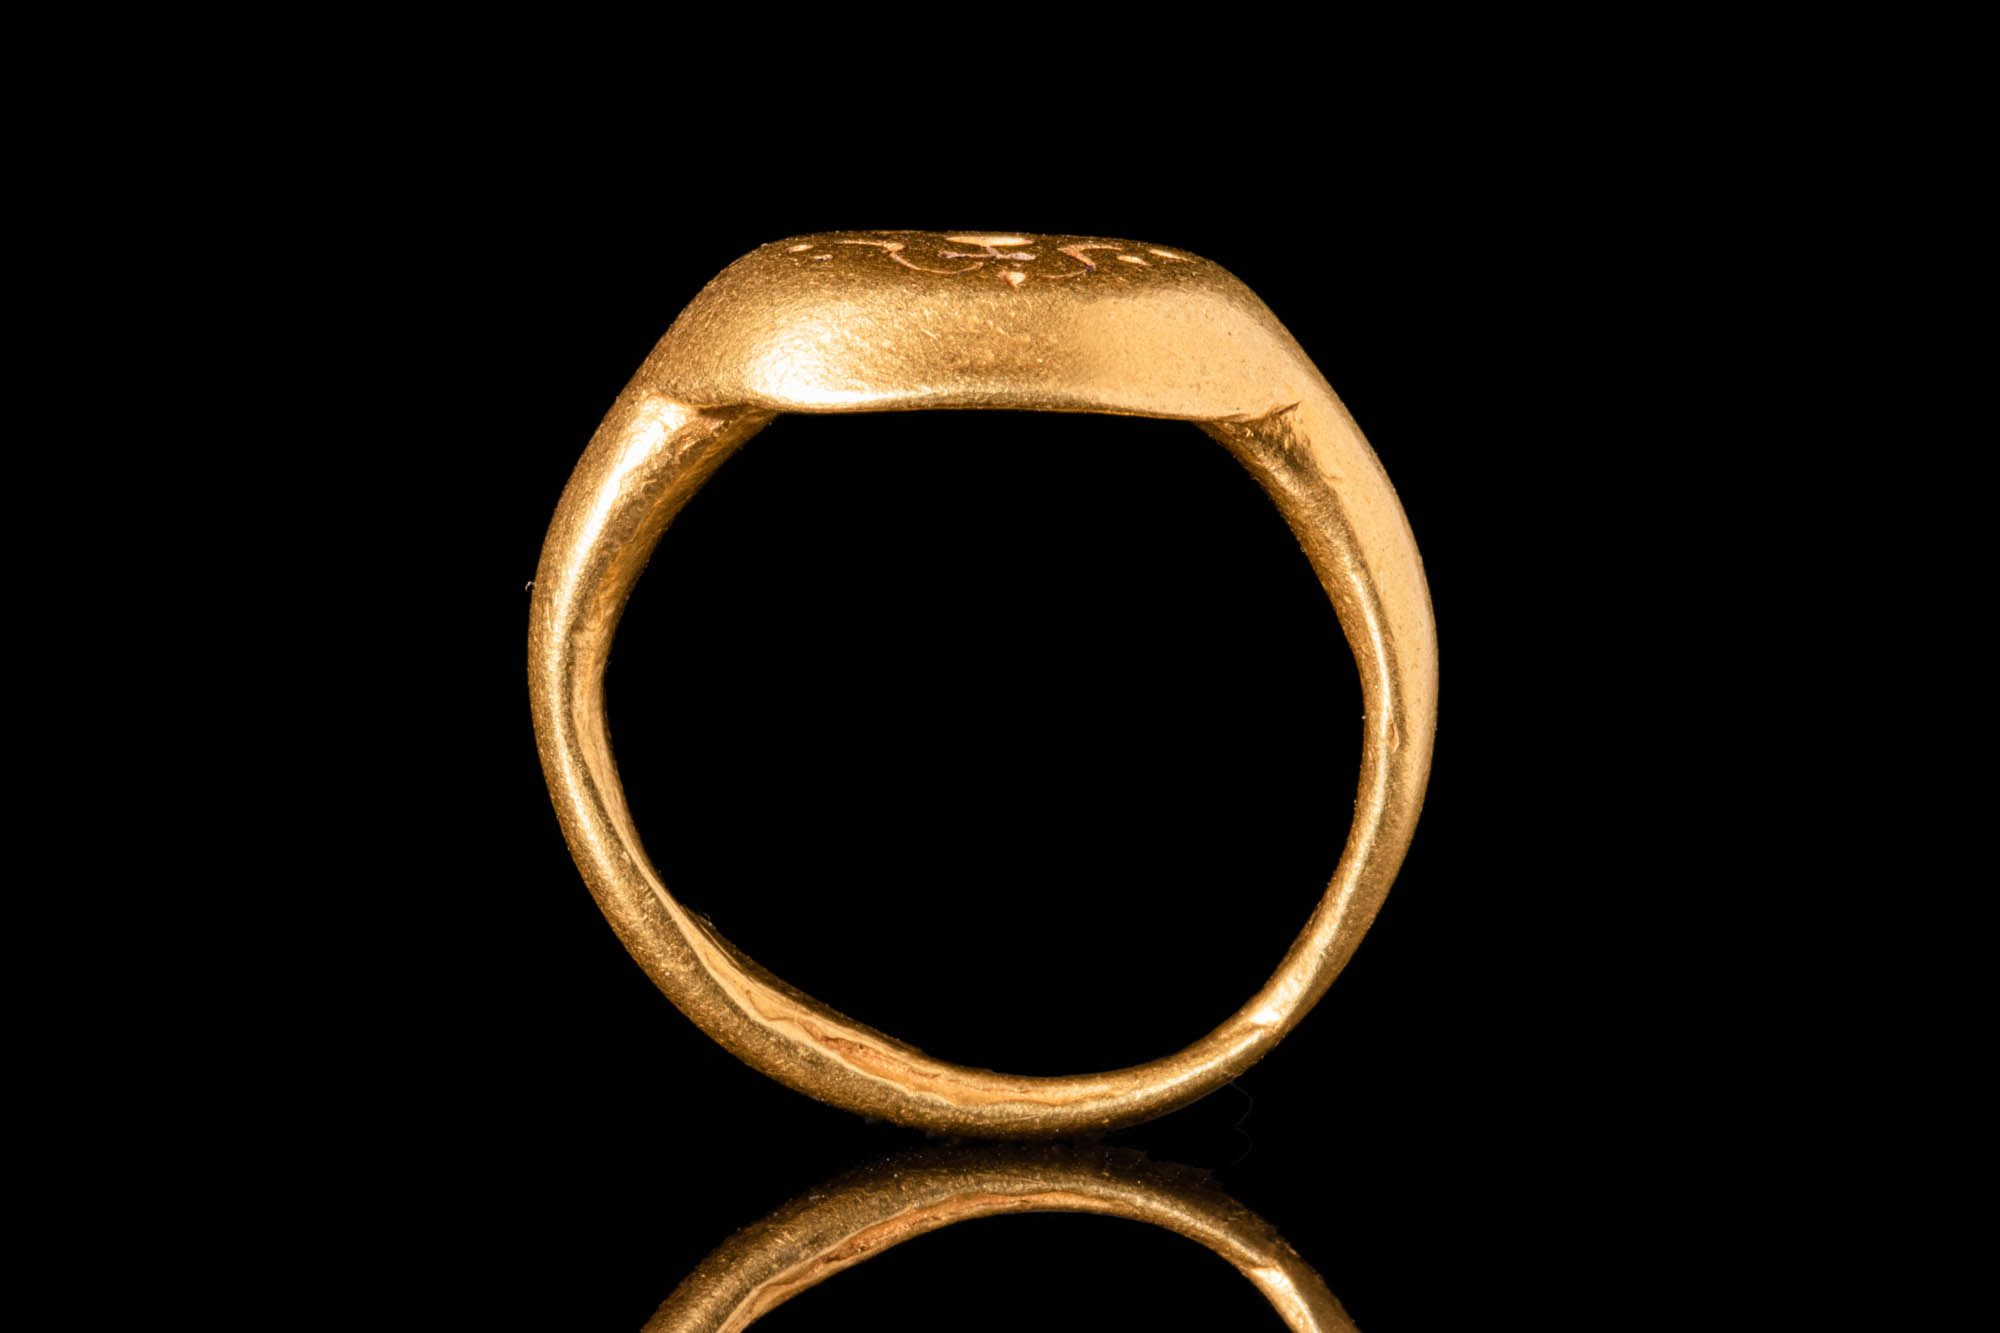 RARE JAVANESE GOLD RING WITH SRI MOTIF - Image 5 of 5